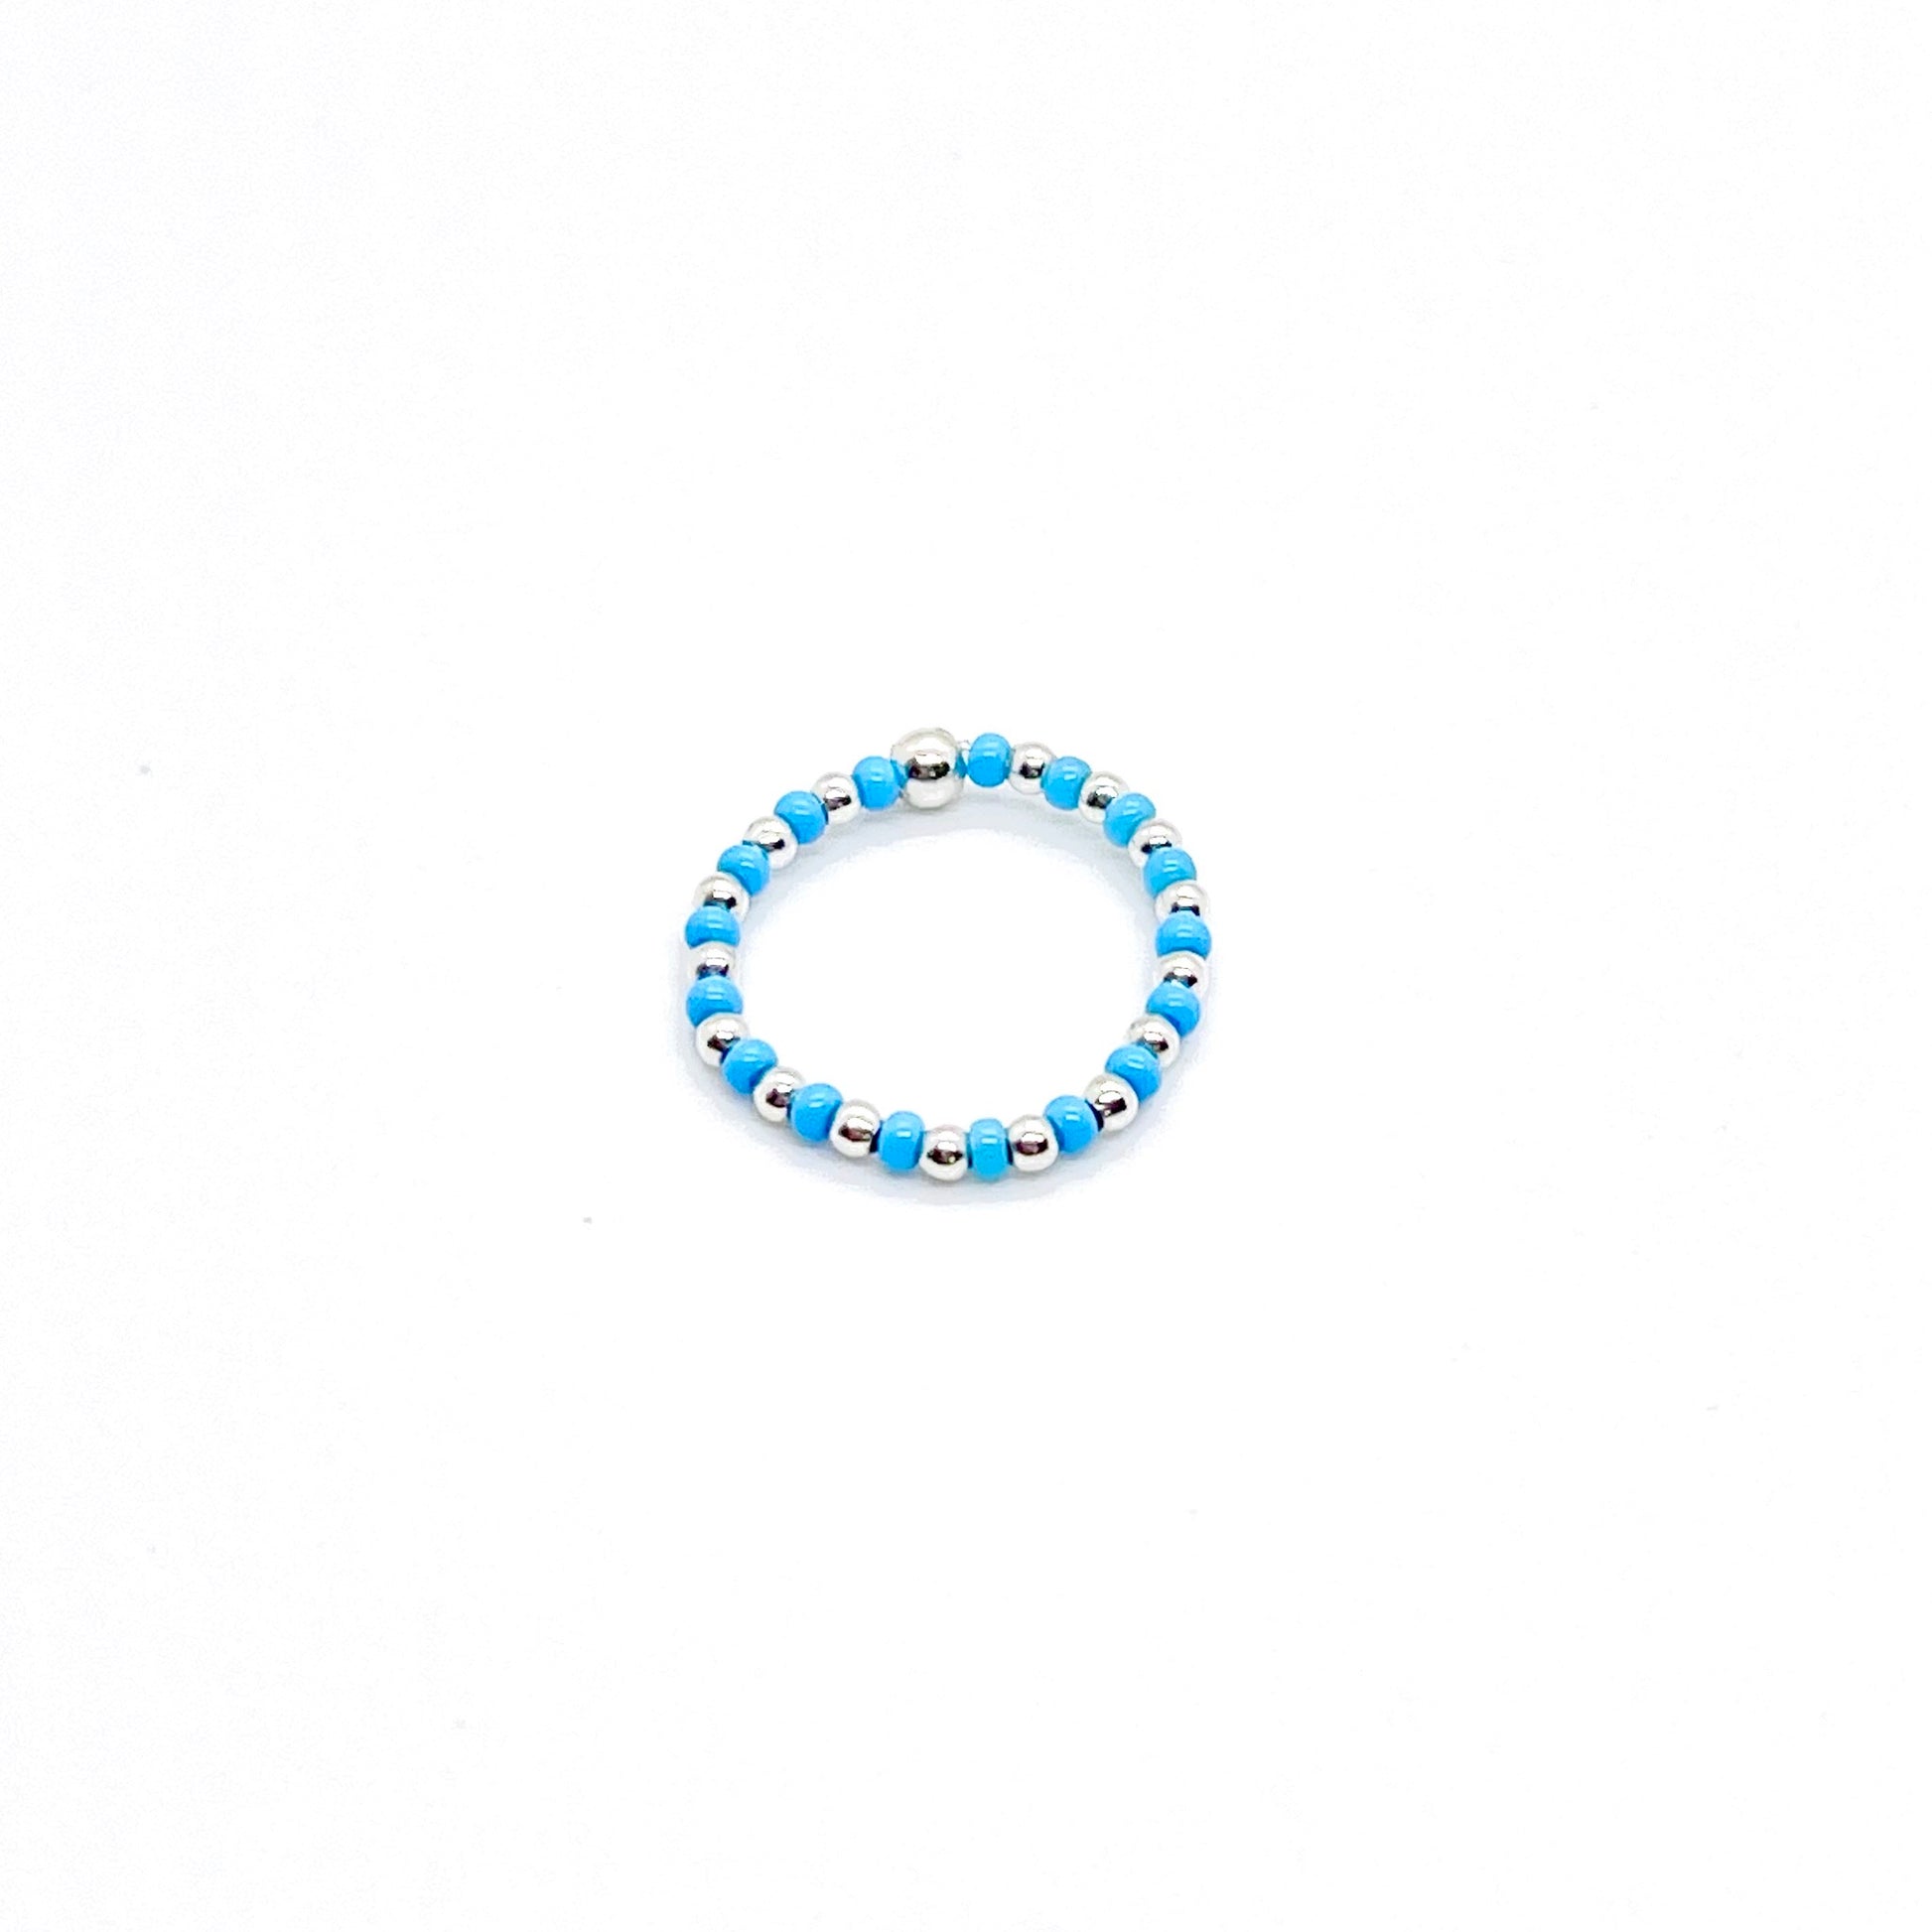 Seed bead ring | 2mm silver ball ring with alternating blue seed beads on stretch cord.